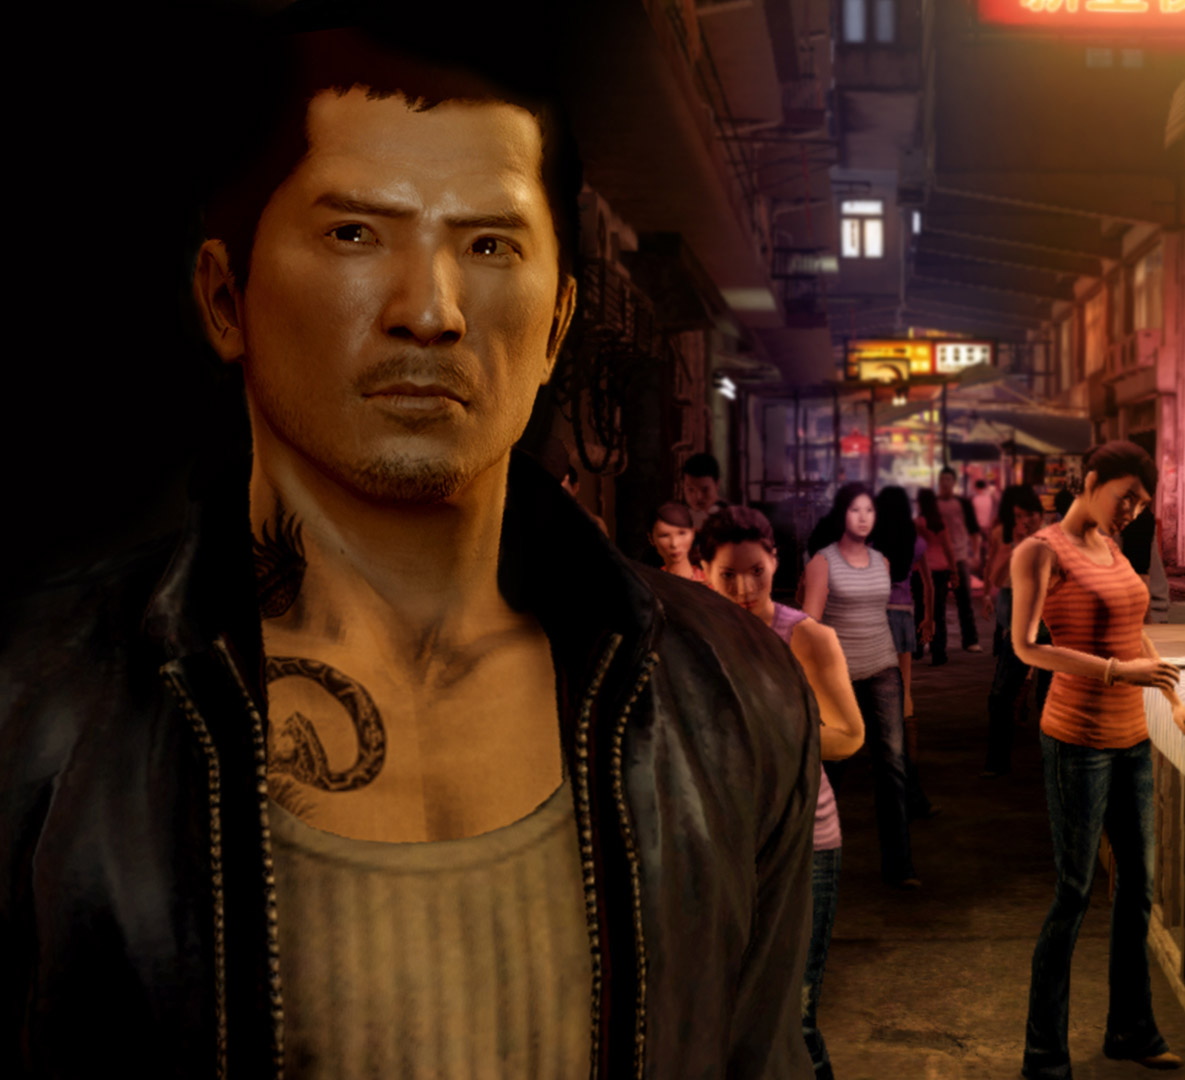 The Sleeping Dogs Team Are Working on a Sequel titled Triad Wars